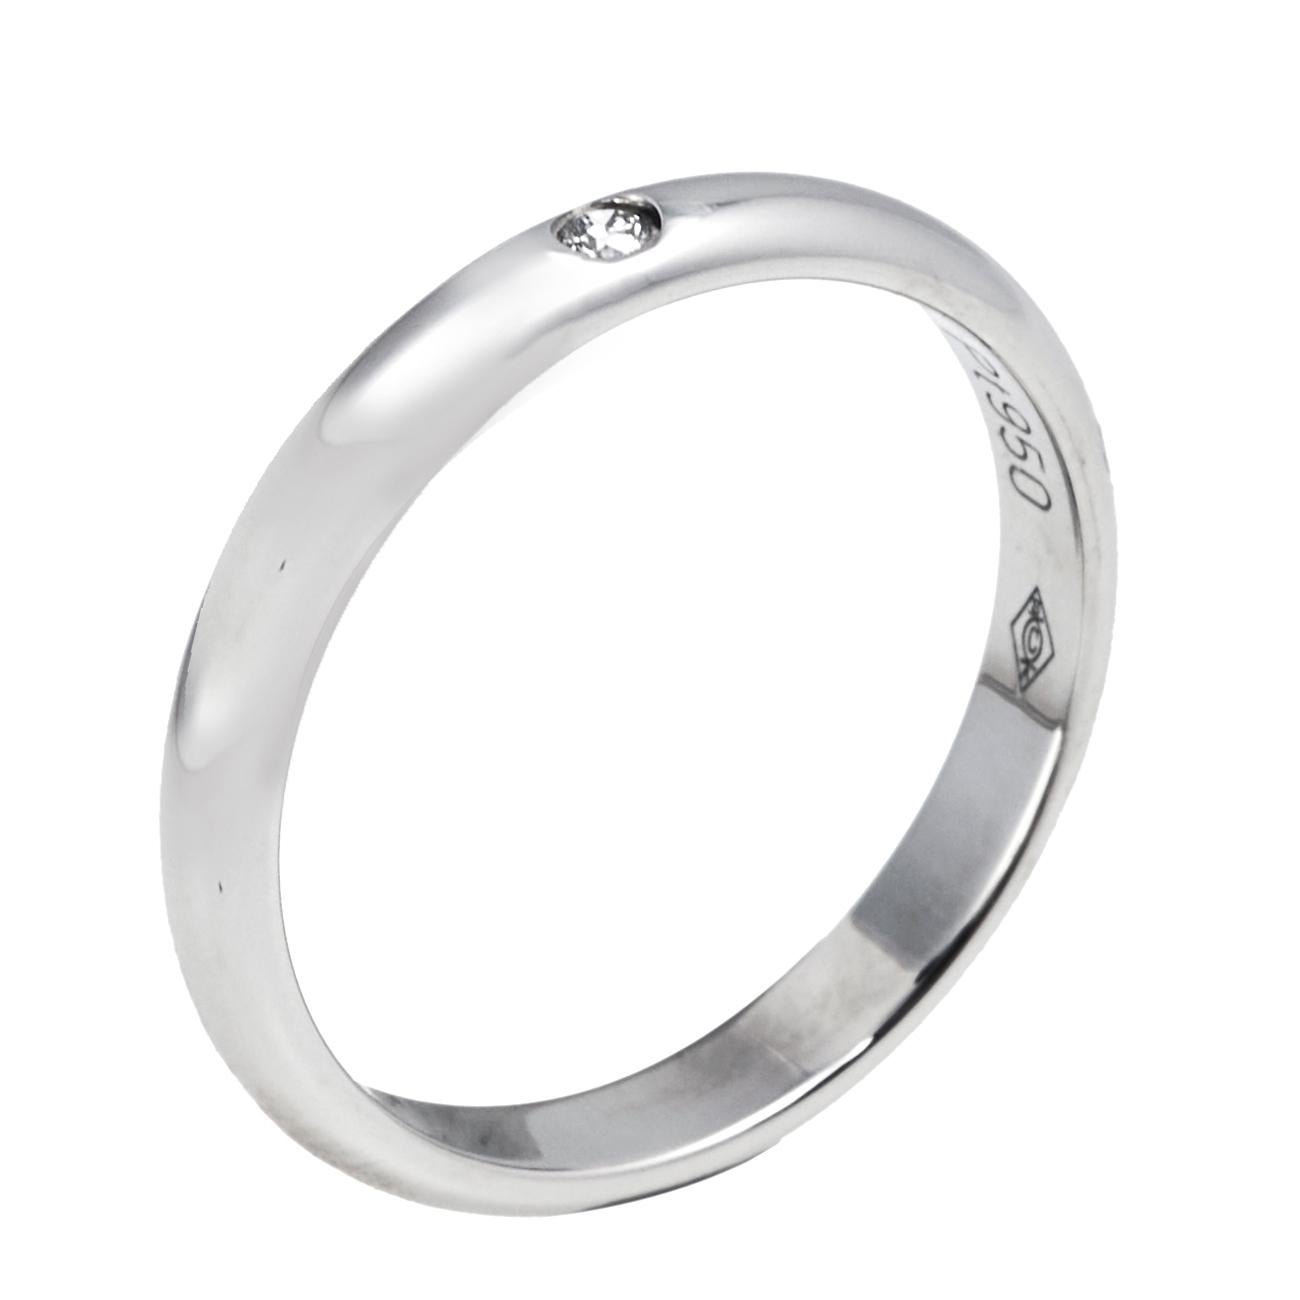 This Cartier 1985 Wedding ring comes in platinum and boasts of a luxurious yet simplistic design approach. The band features a sparkling diamond and the smooth lines give it an exquisite finish. The subtle allure of this piece makes it ideal to be